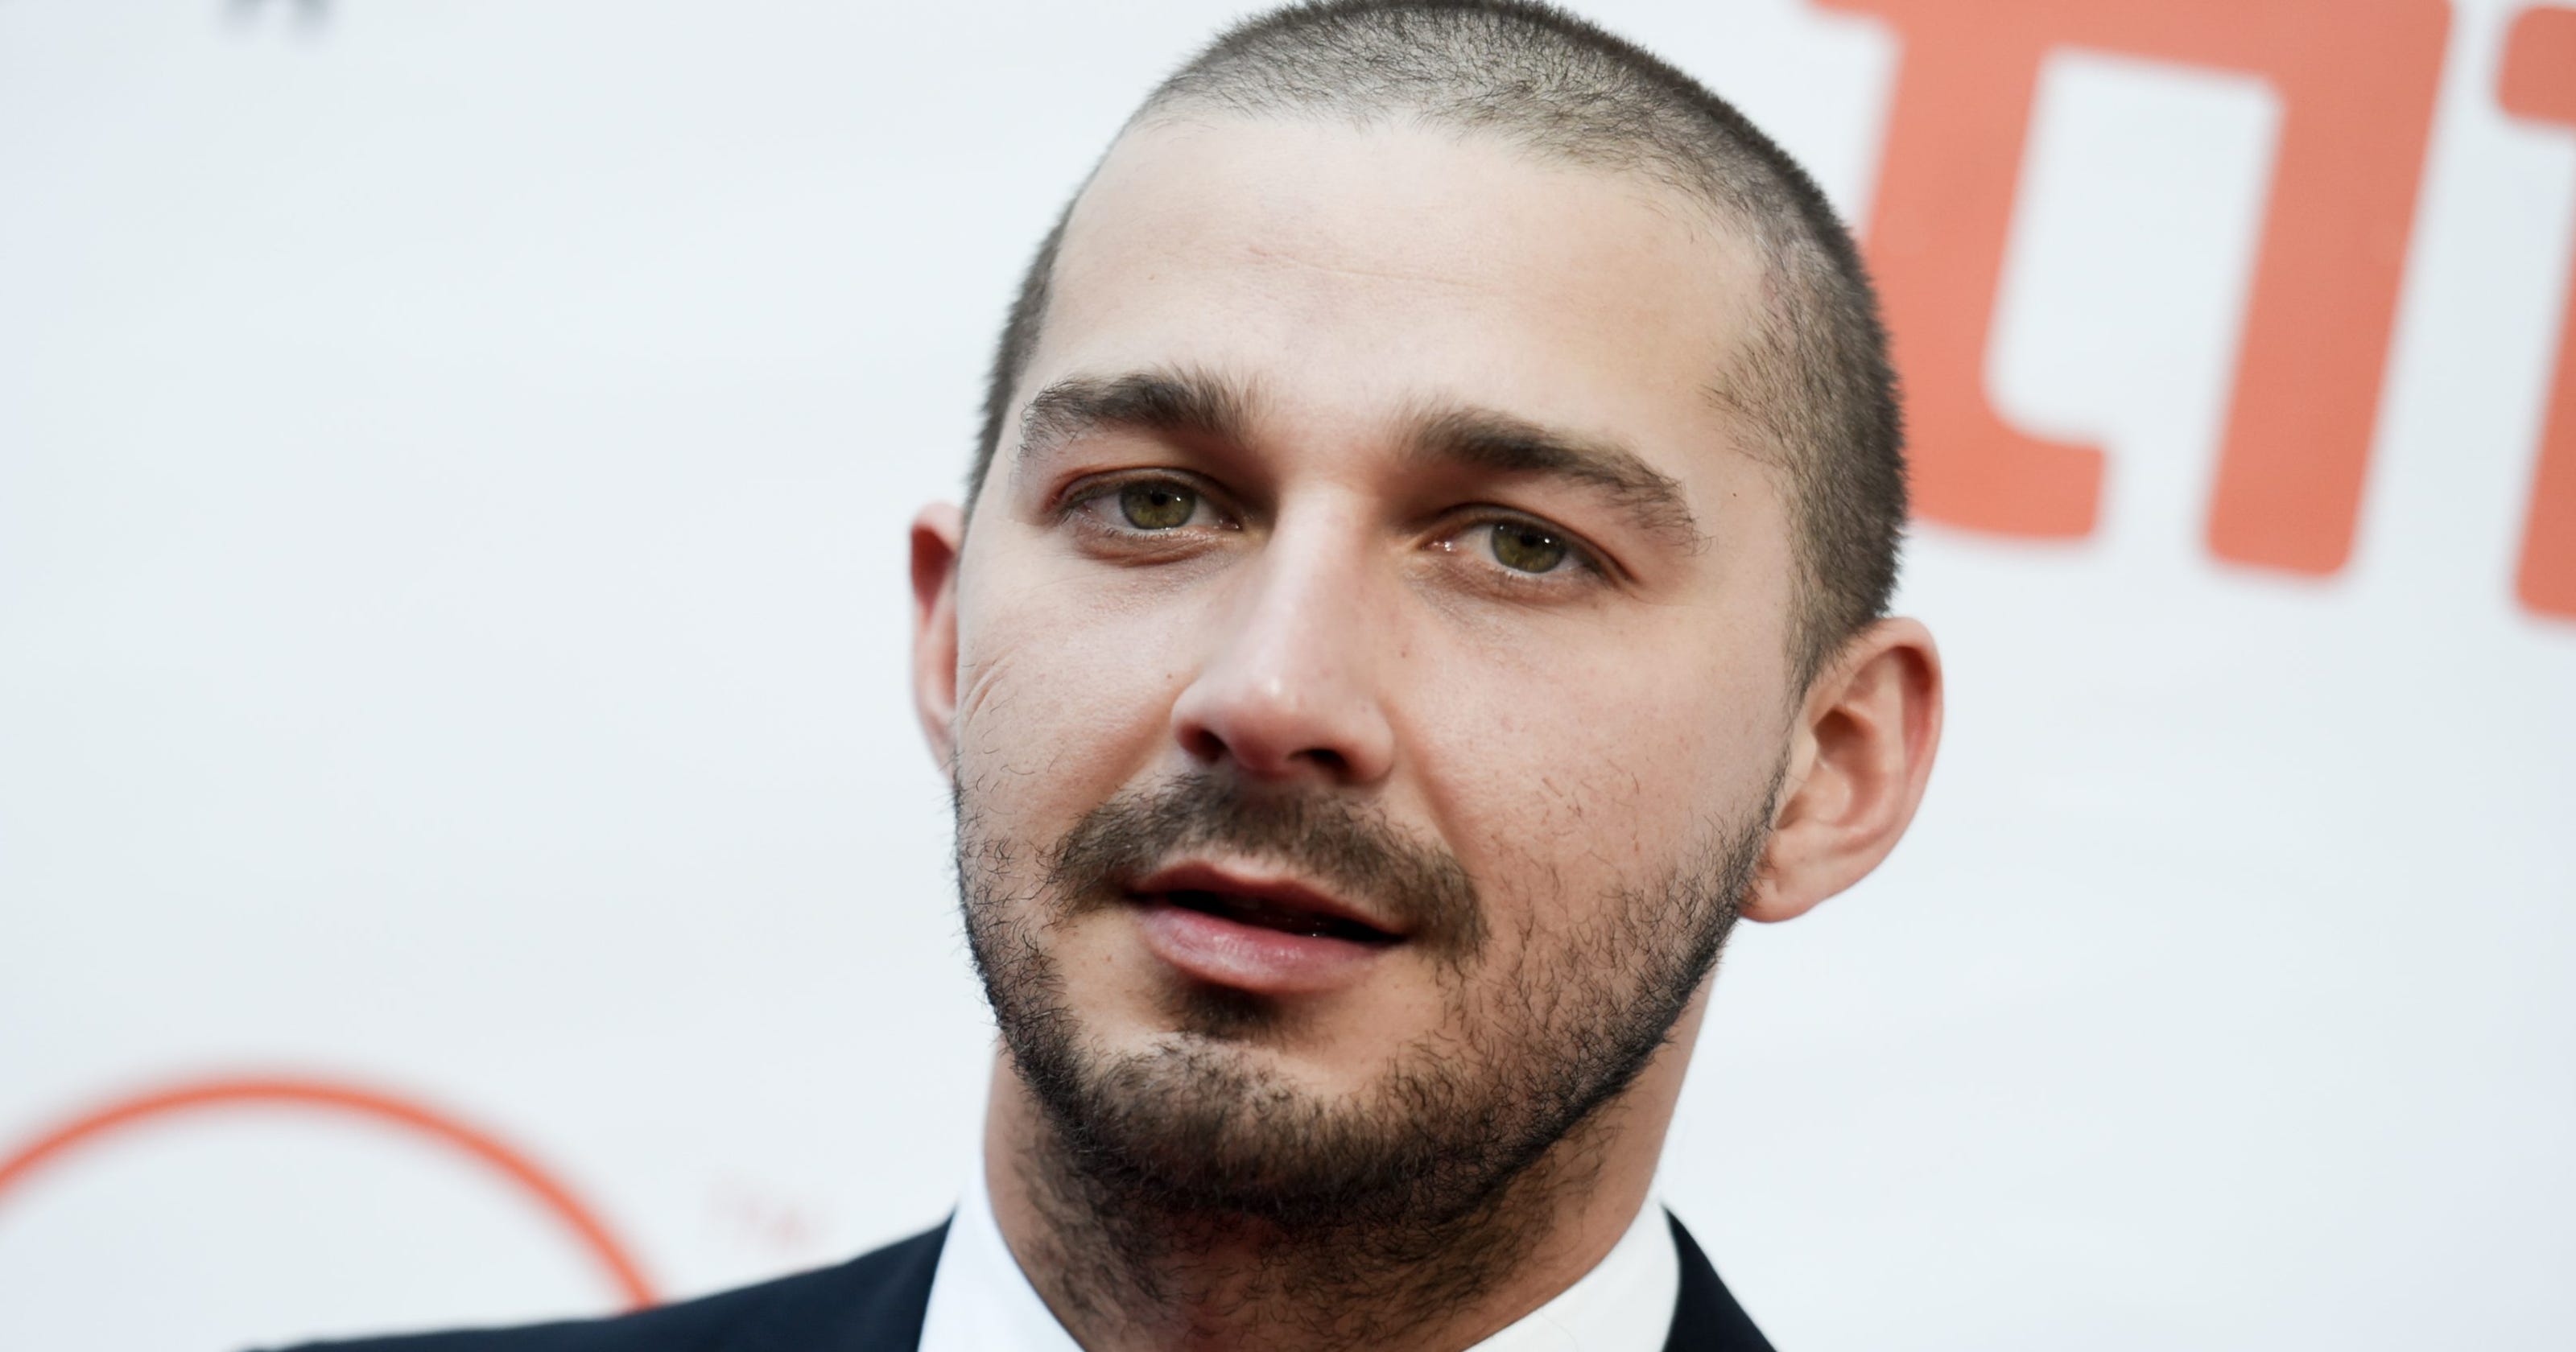 Shia LaBeouf and Mia Goth file for divorce, FKA Twigs enters picture